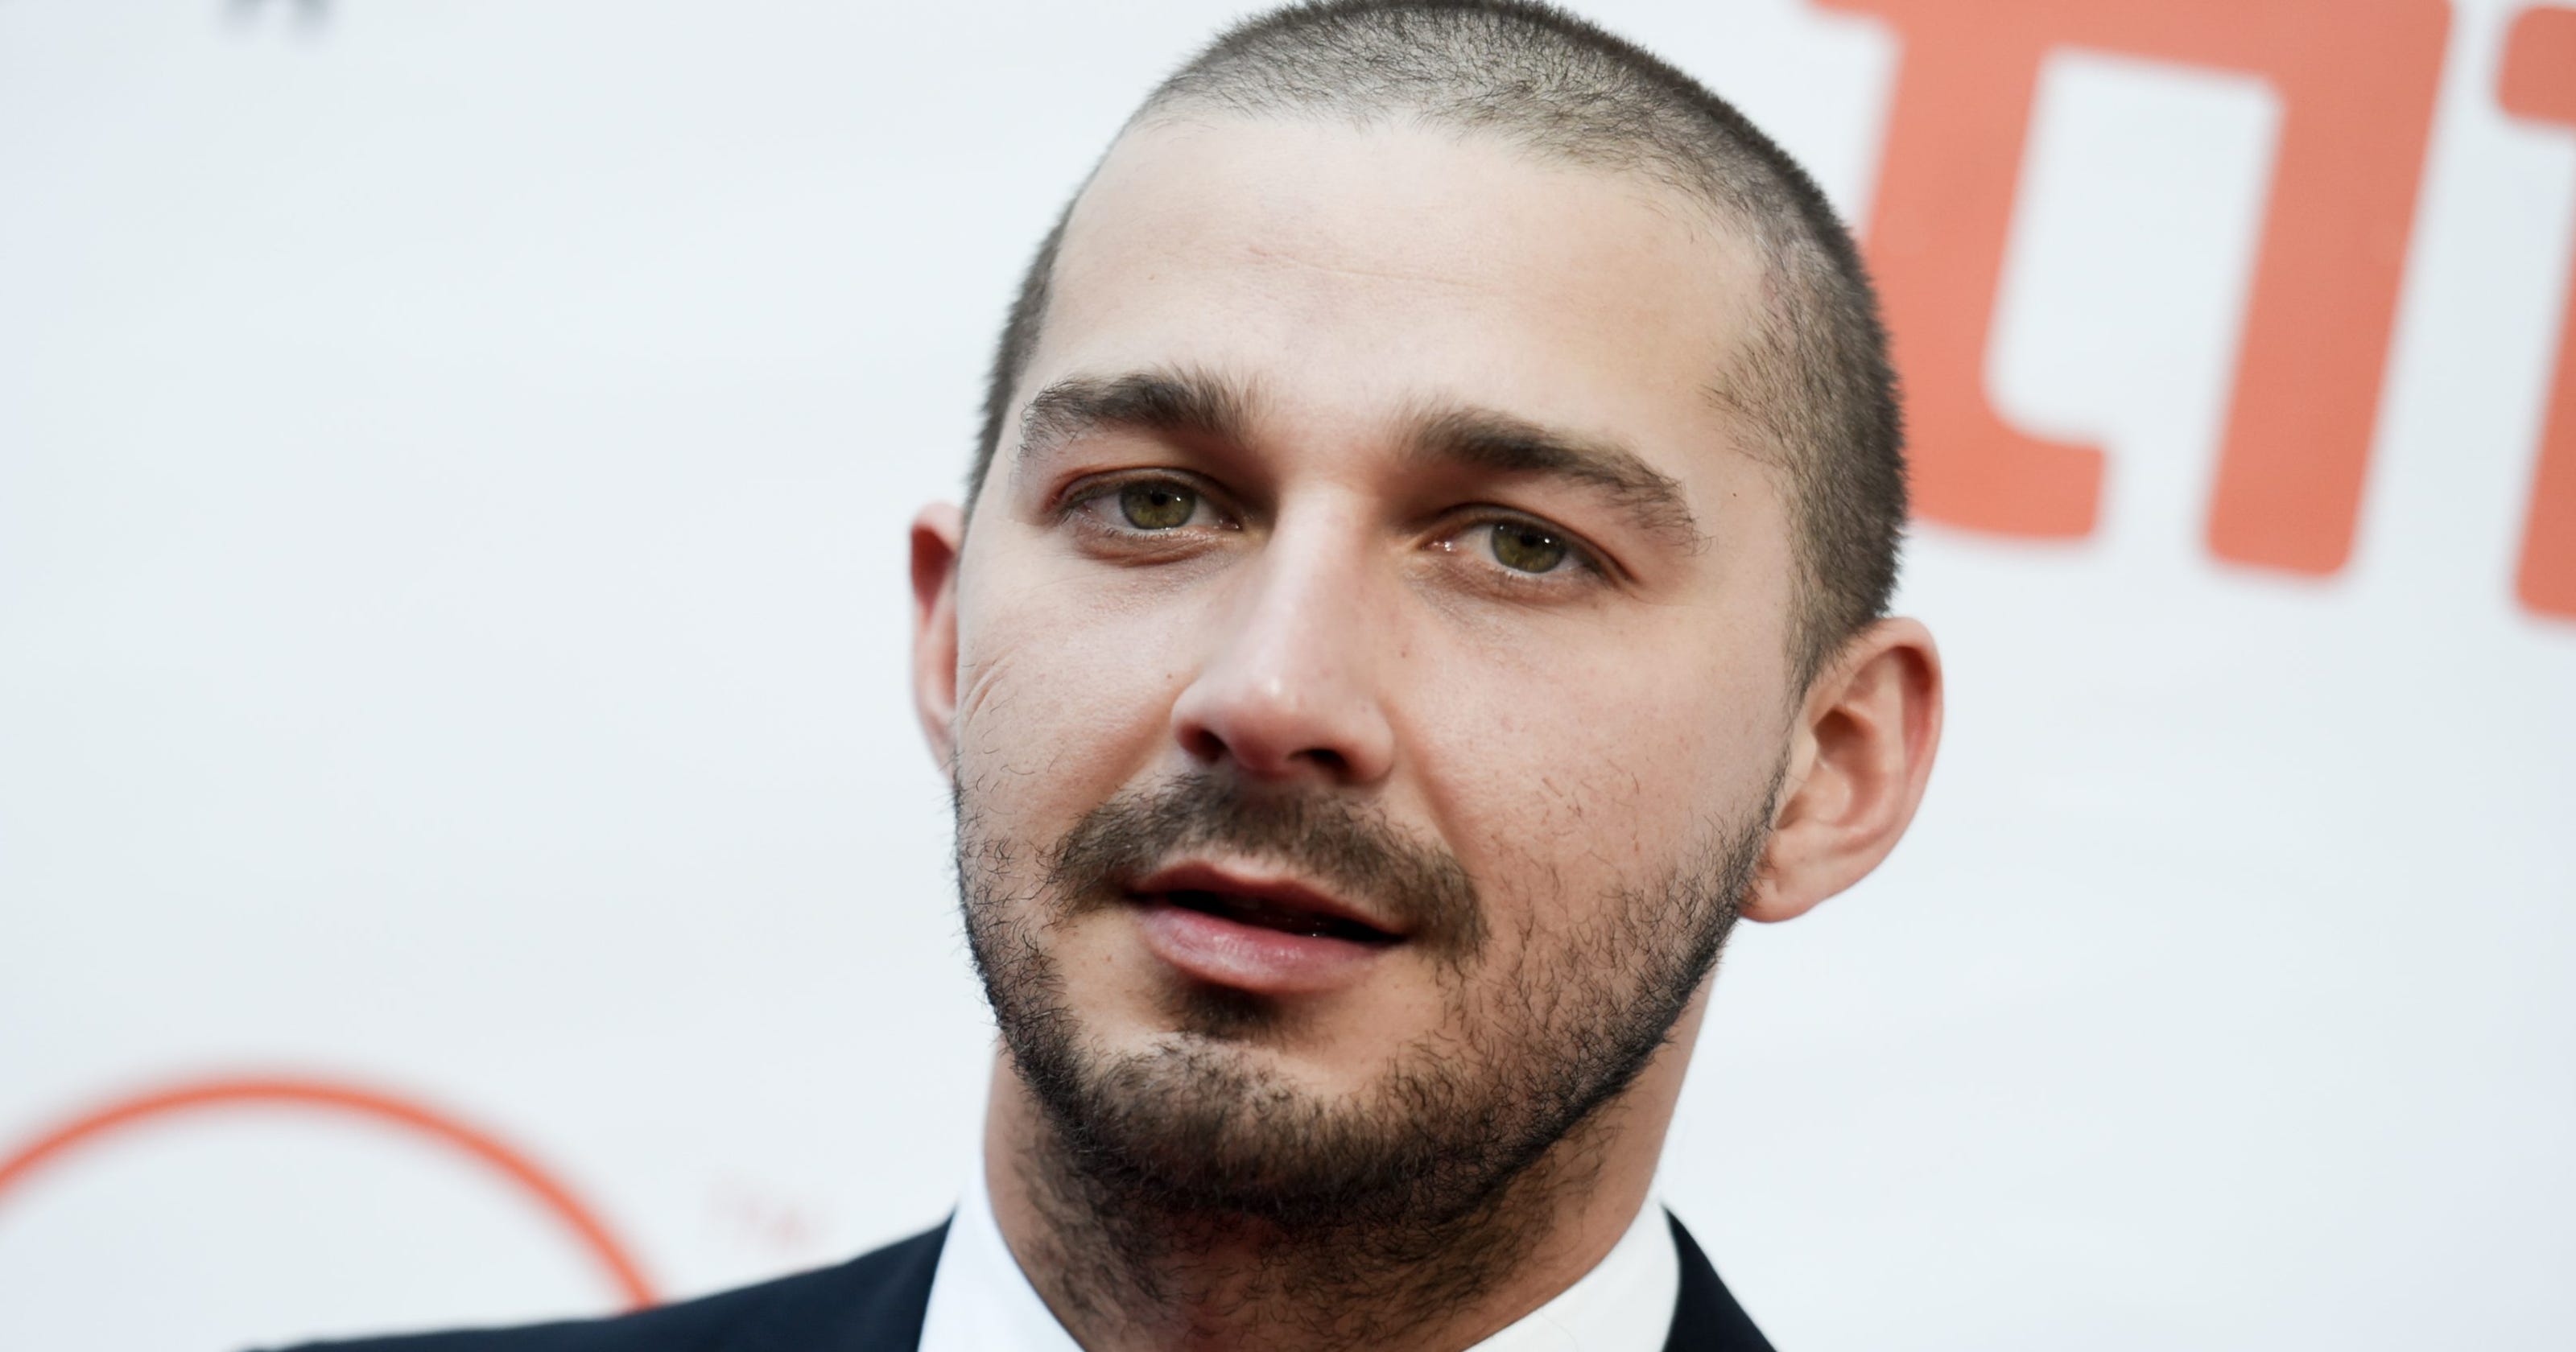 Shia LaBeouf and Mia Goth file for divorce, FKA Twigs enters picture